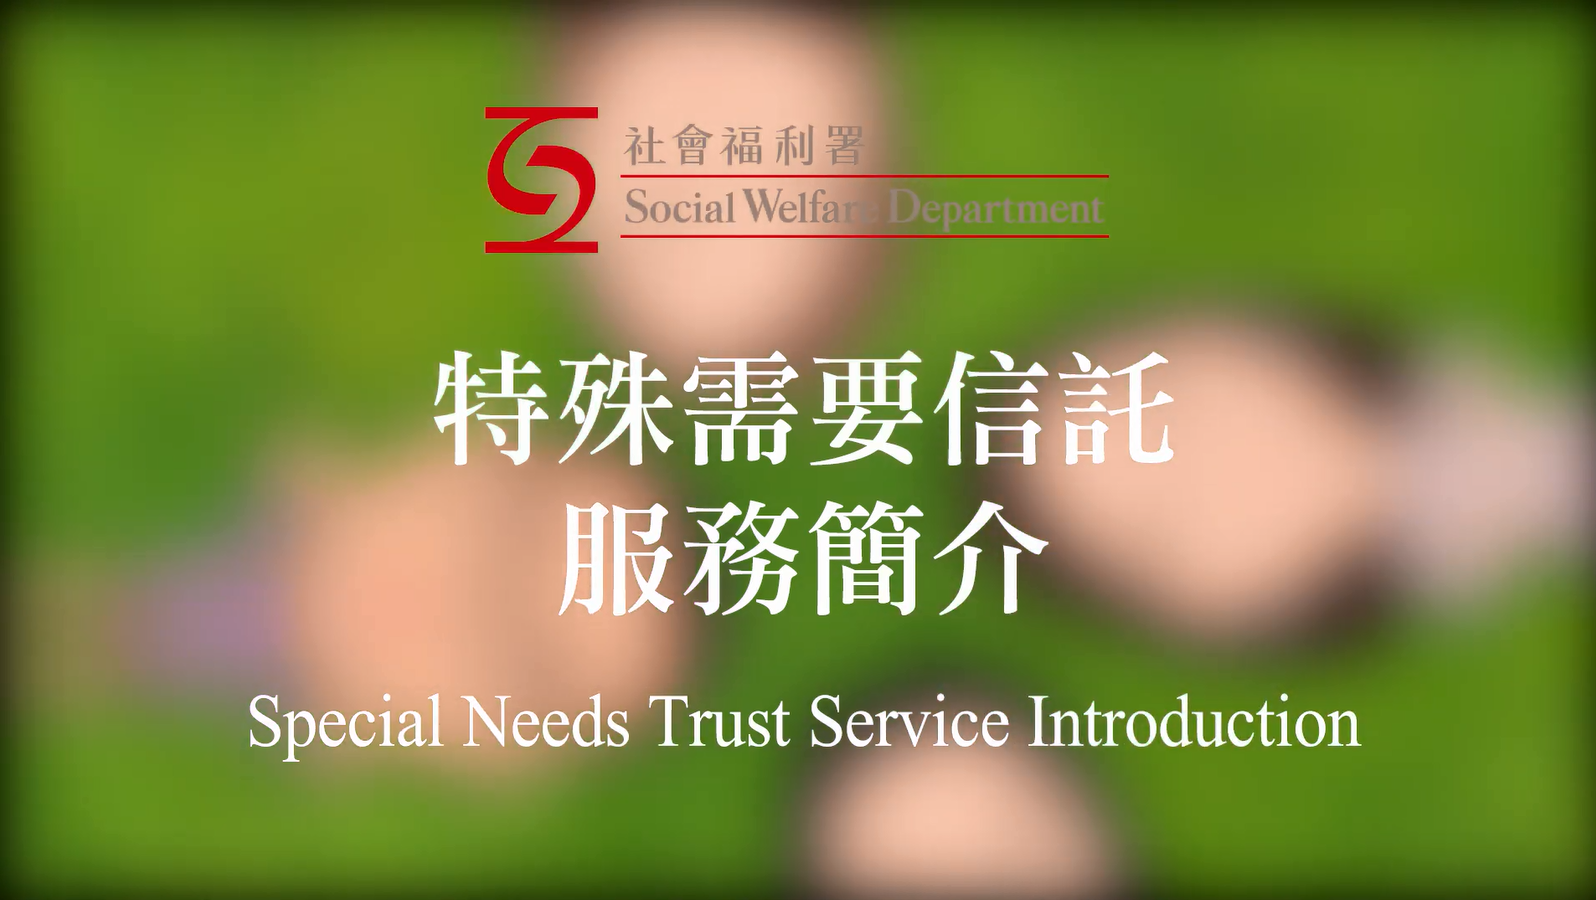 Special Needs Trust Service Introduction